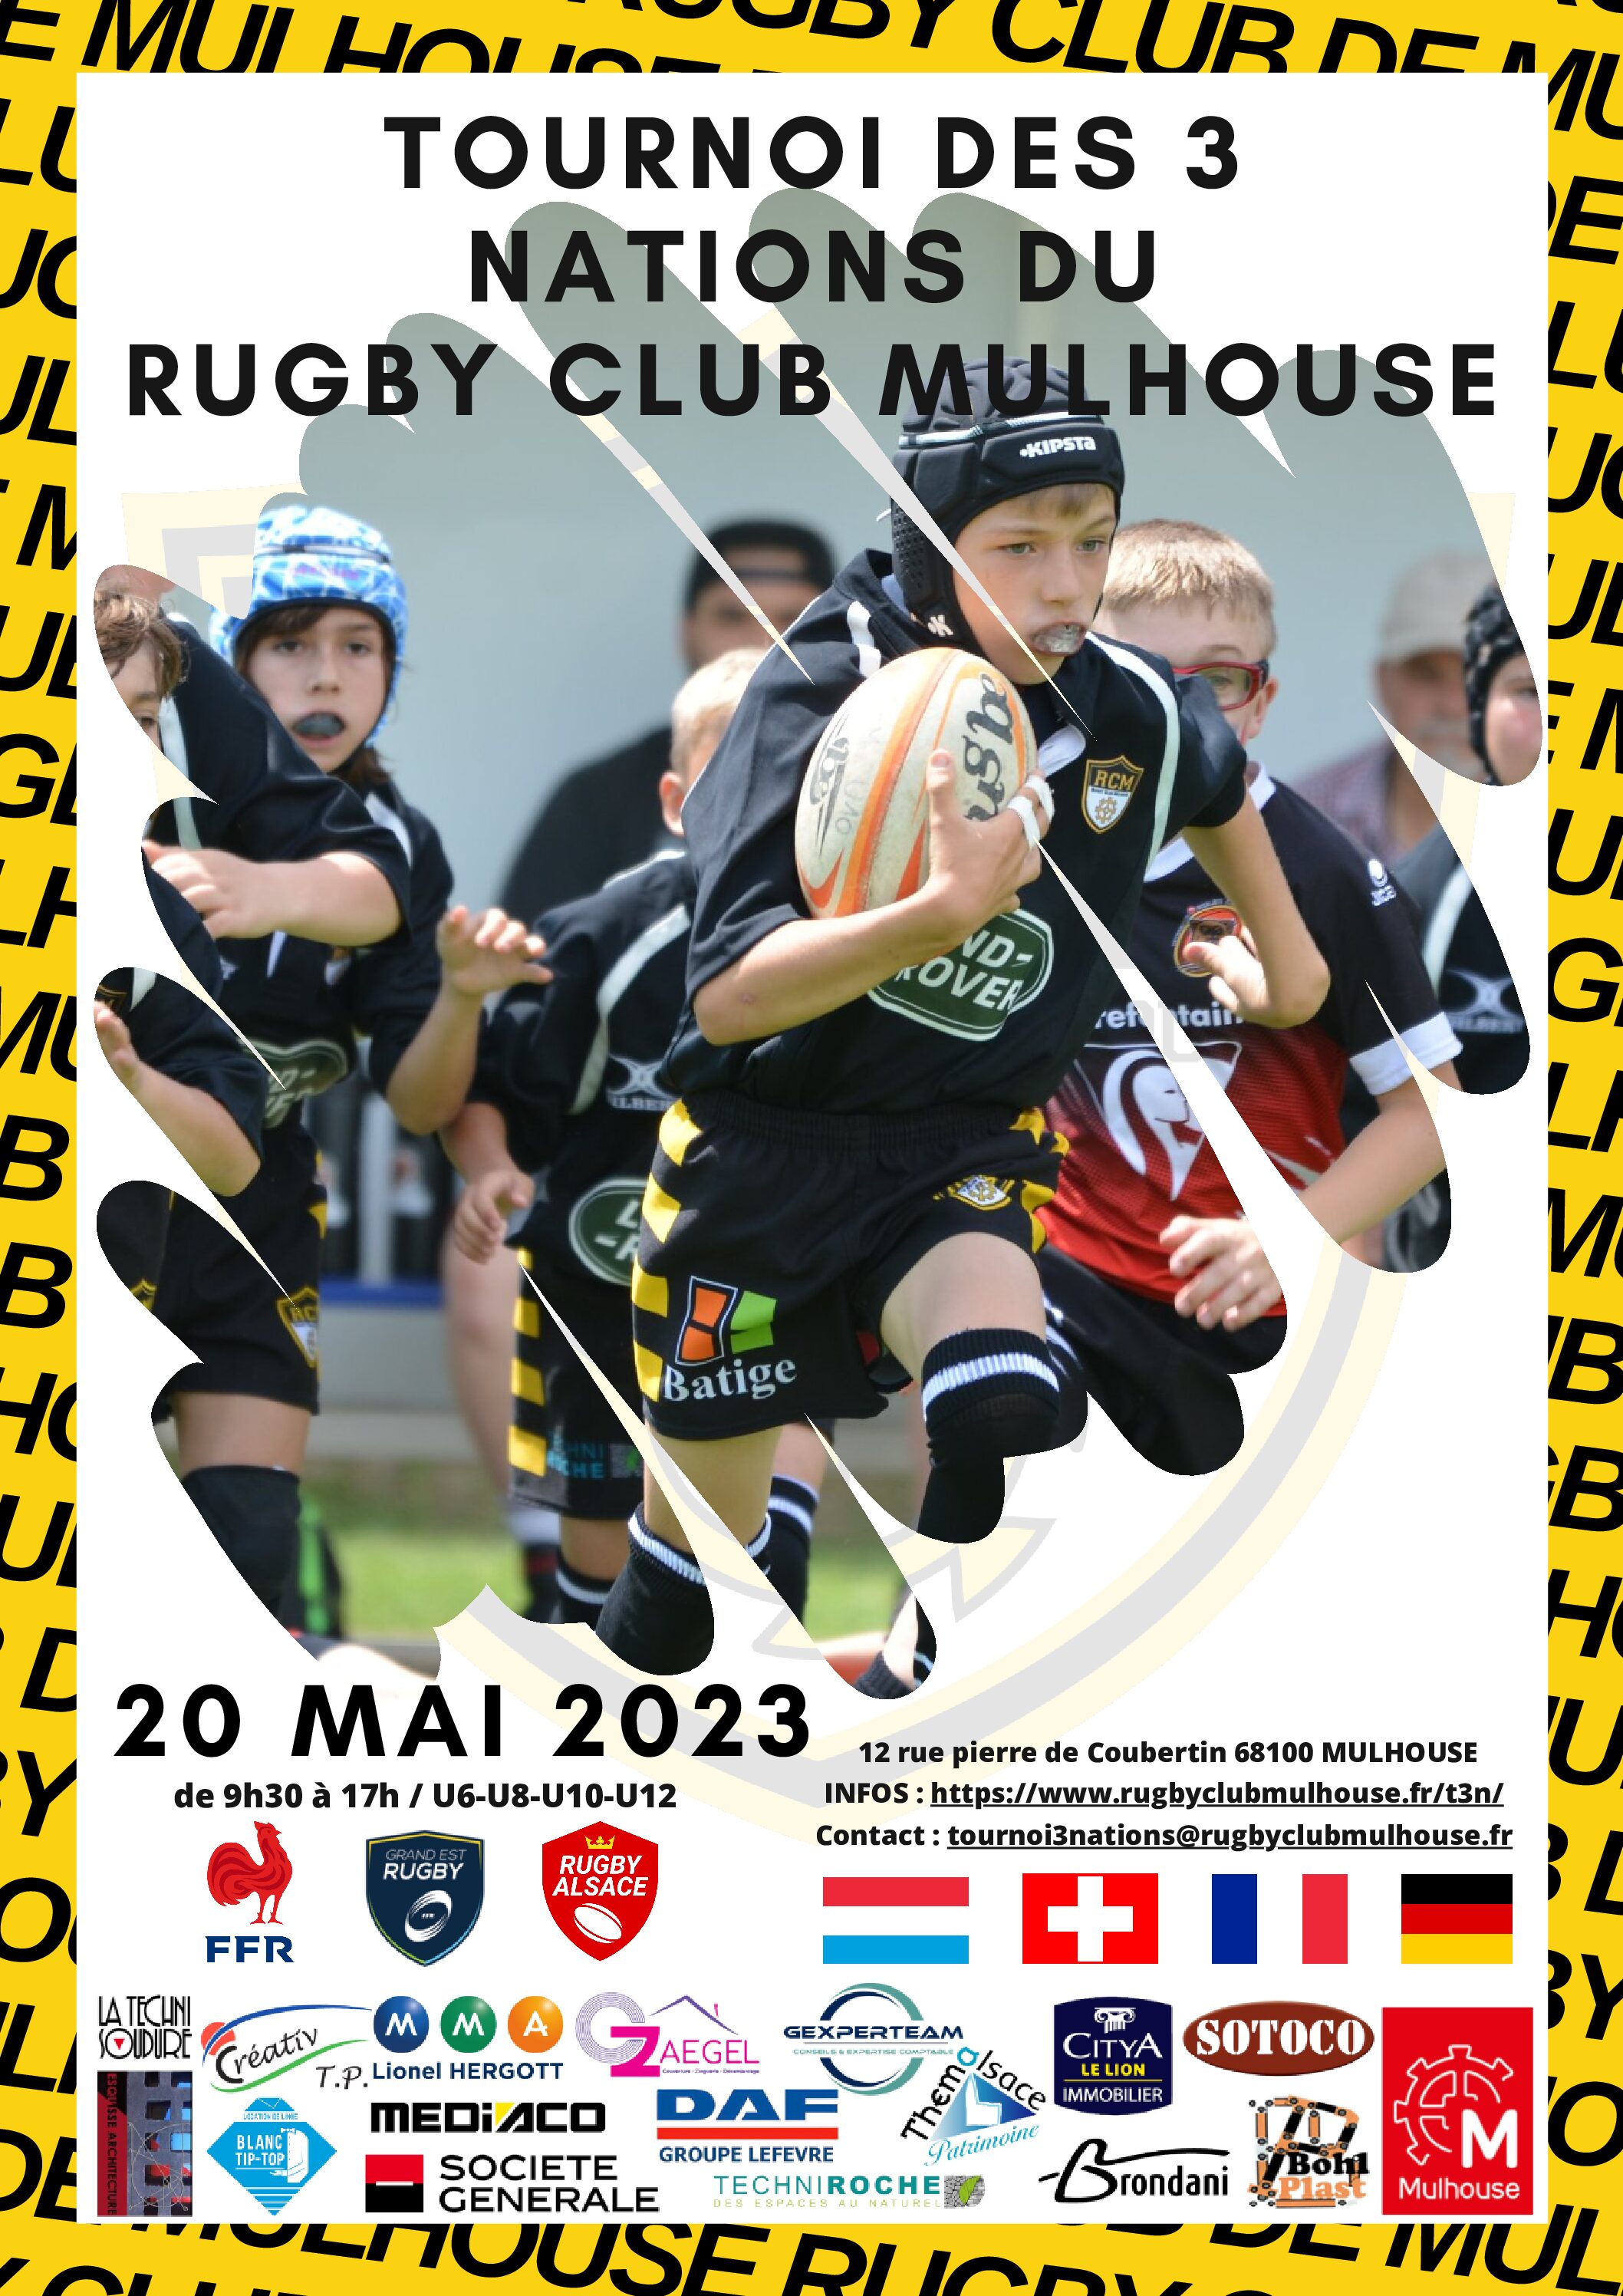 Rugby Club Mulhouse - Tournoi des 3 nations